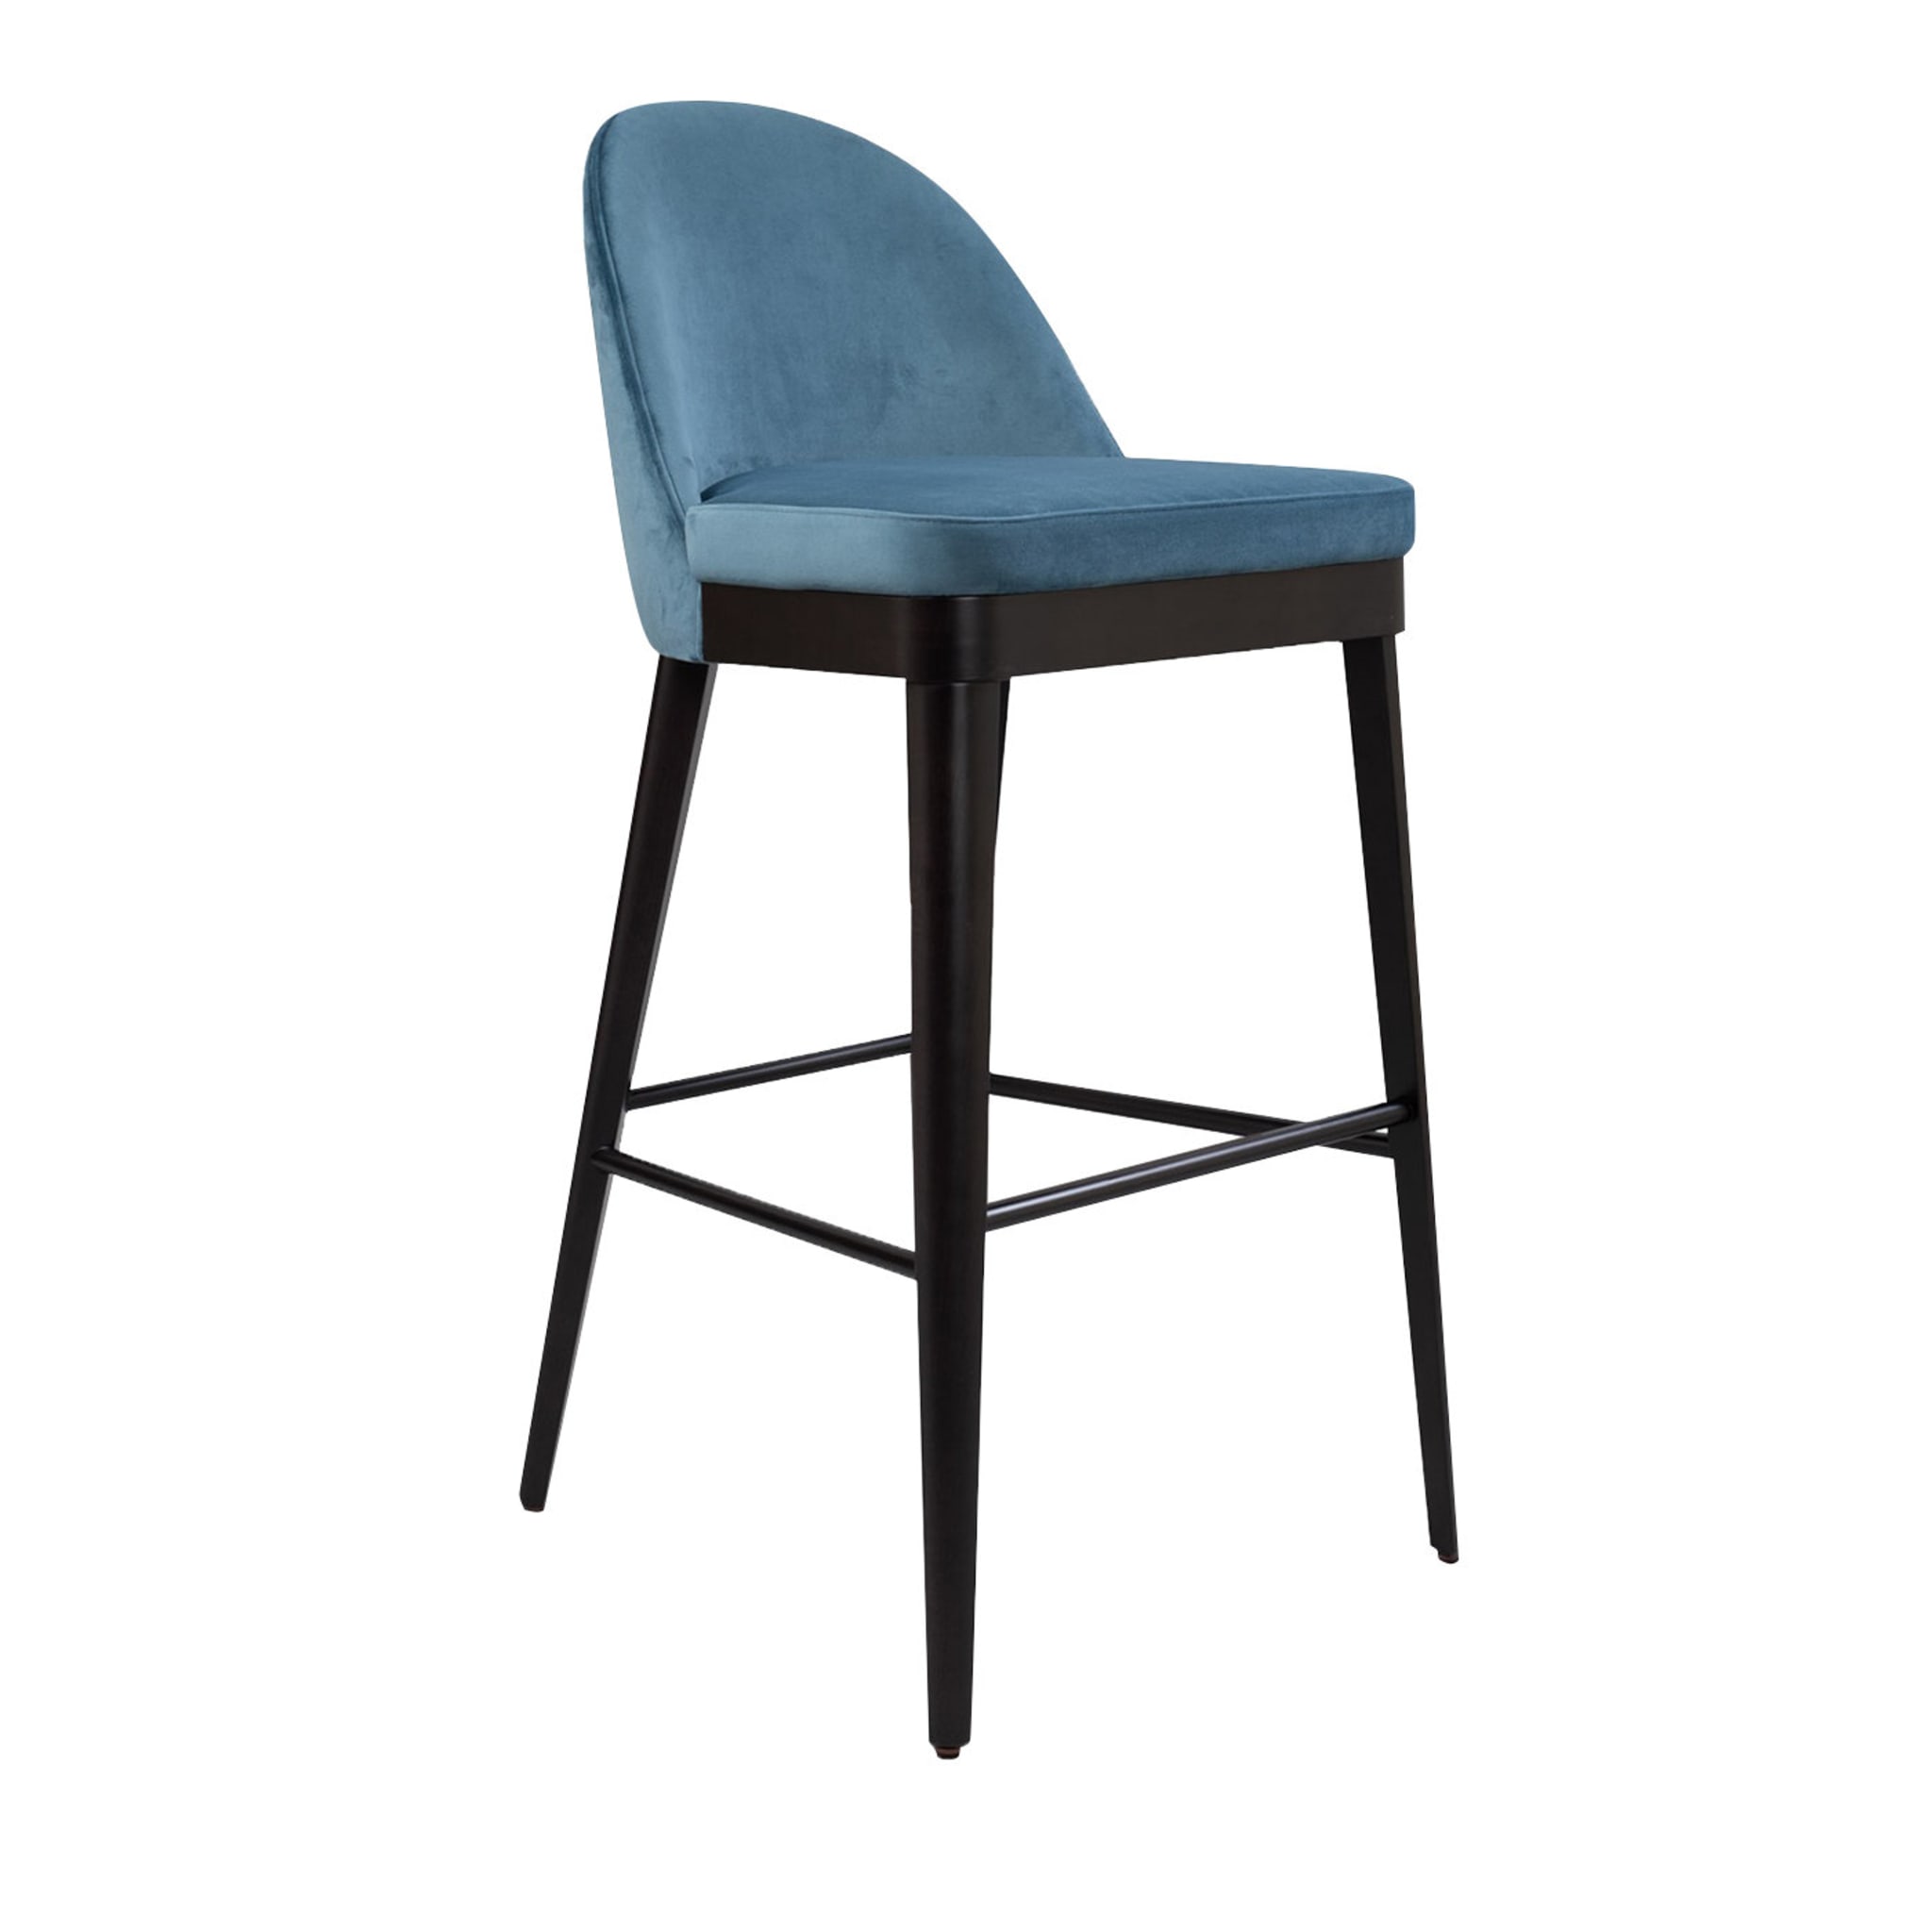 Set of 2 Byblos Cerulean Stools - Main view